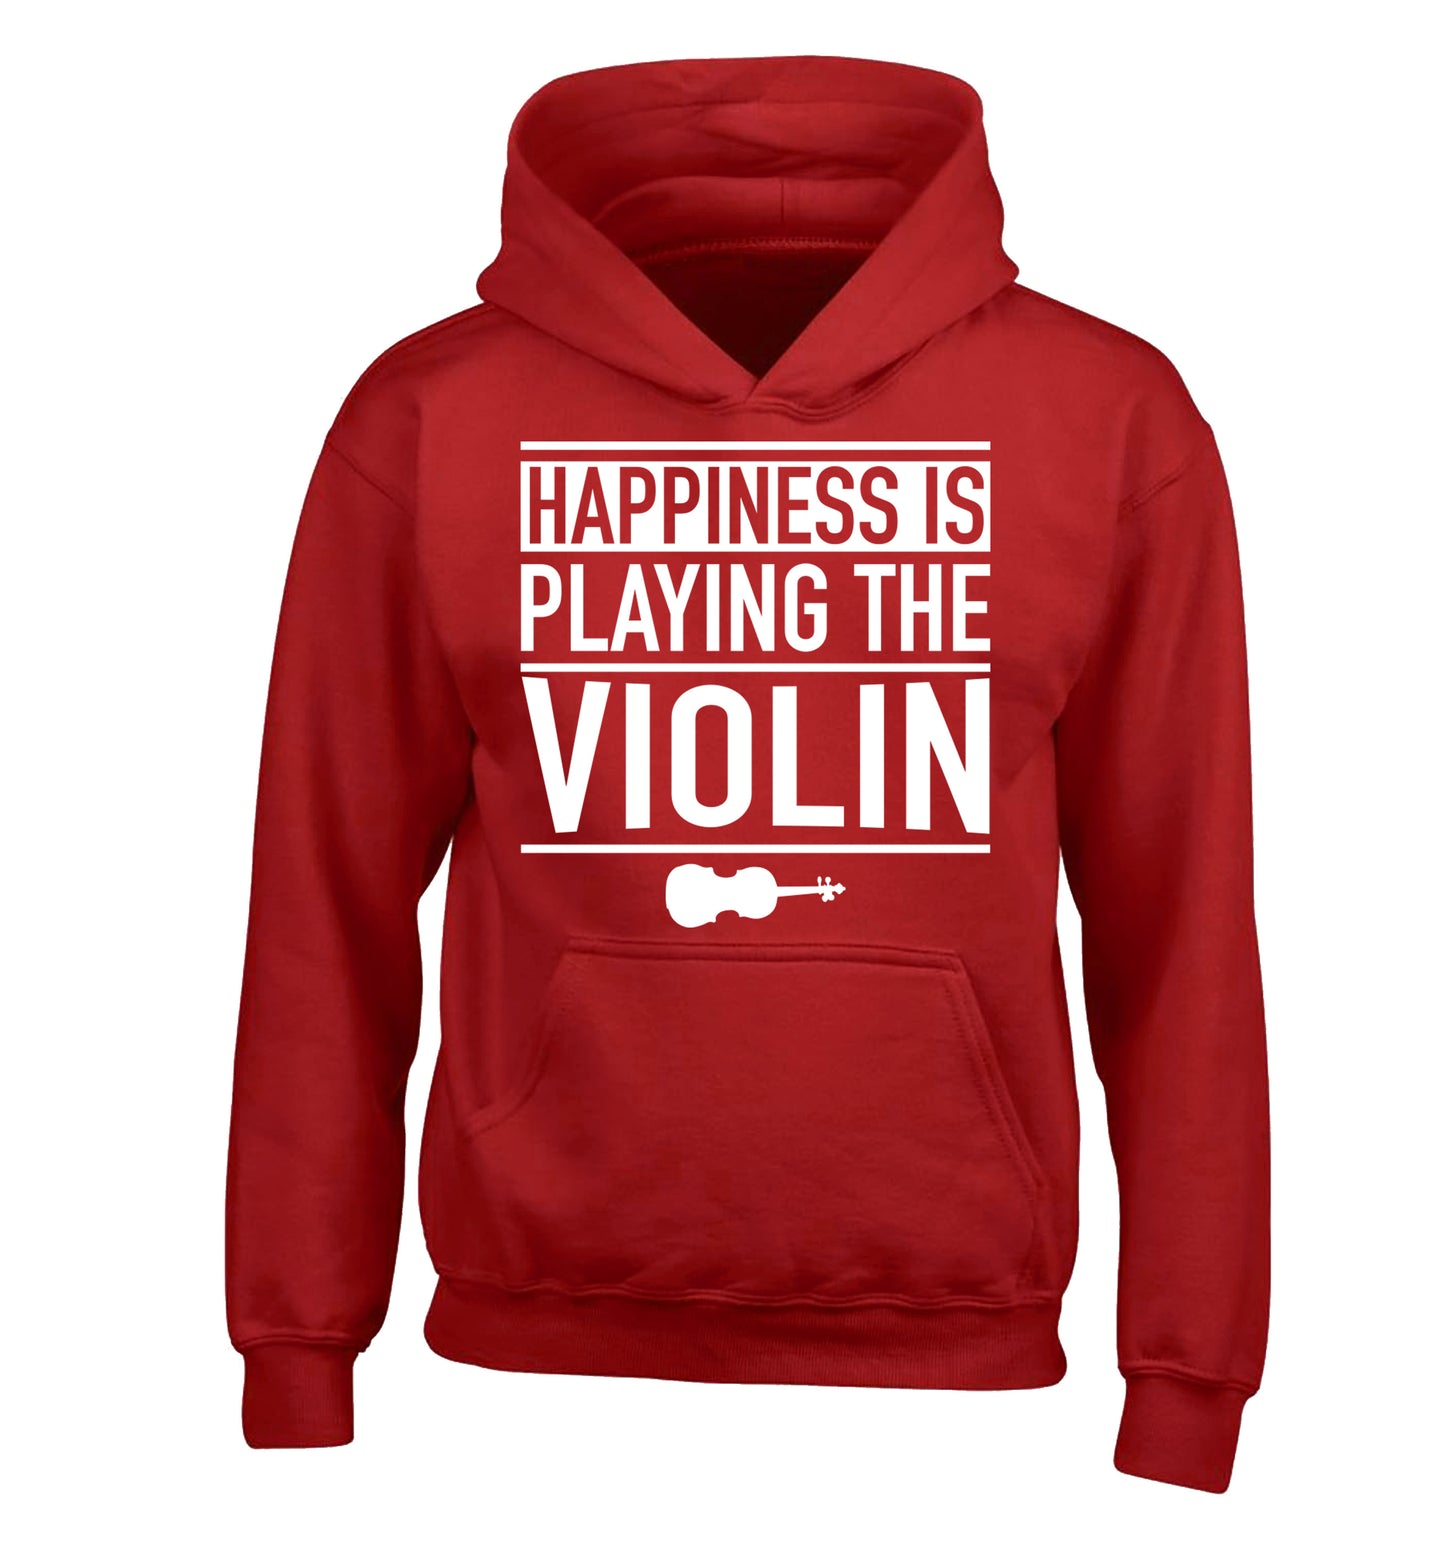 Happiness is playing the violin children's red hoodie 12-13 Years